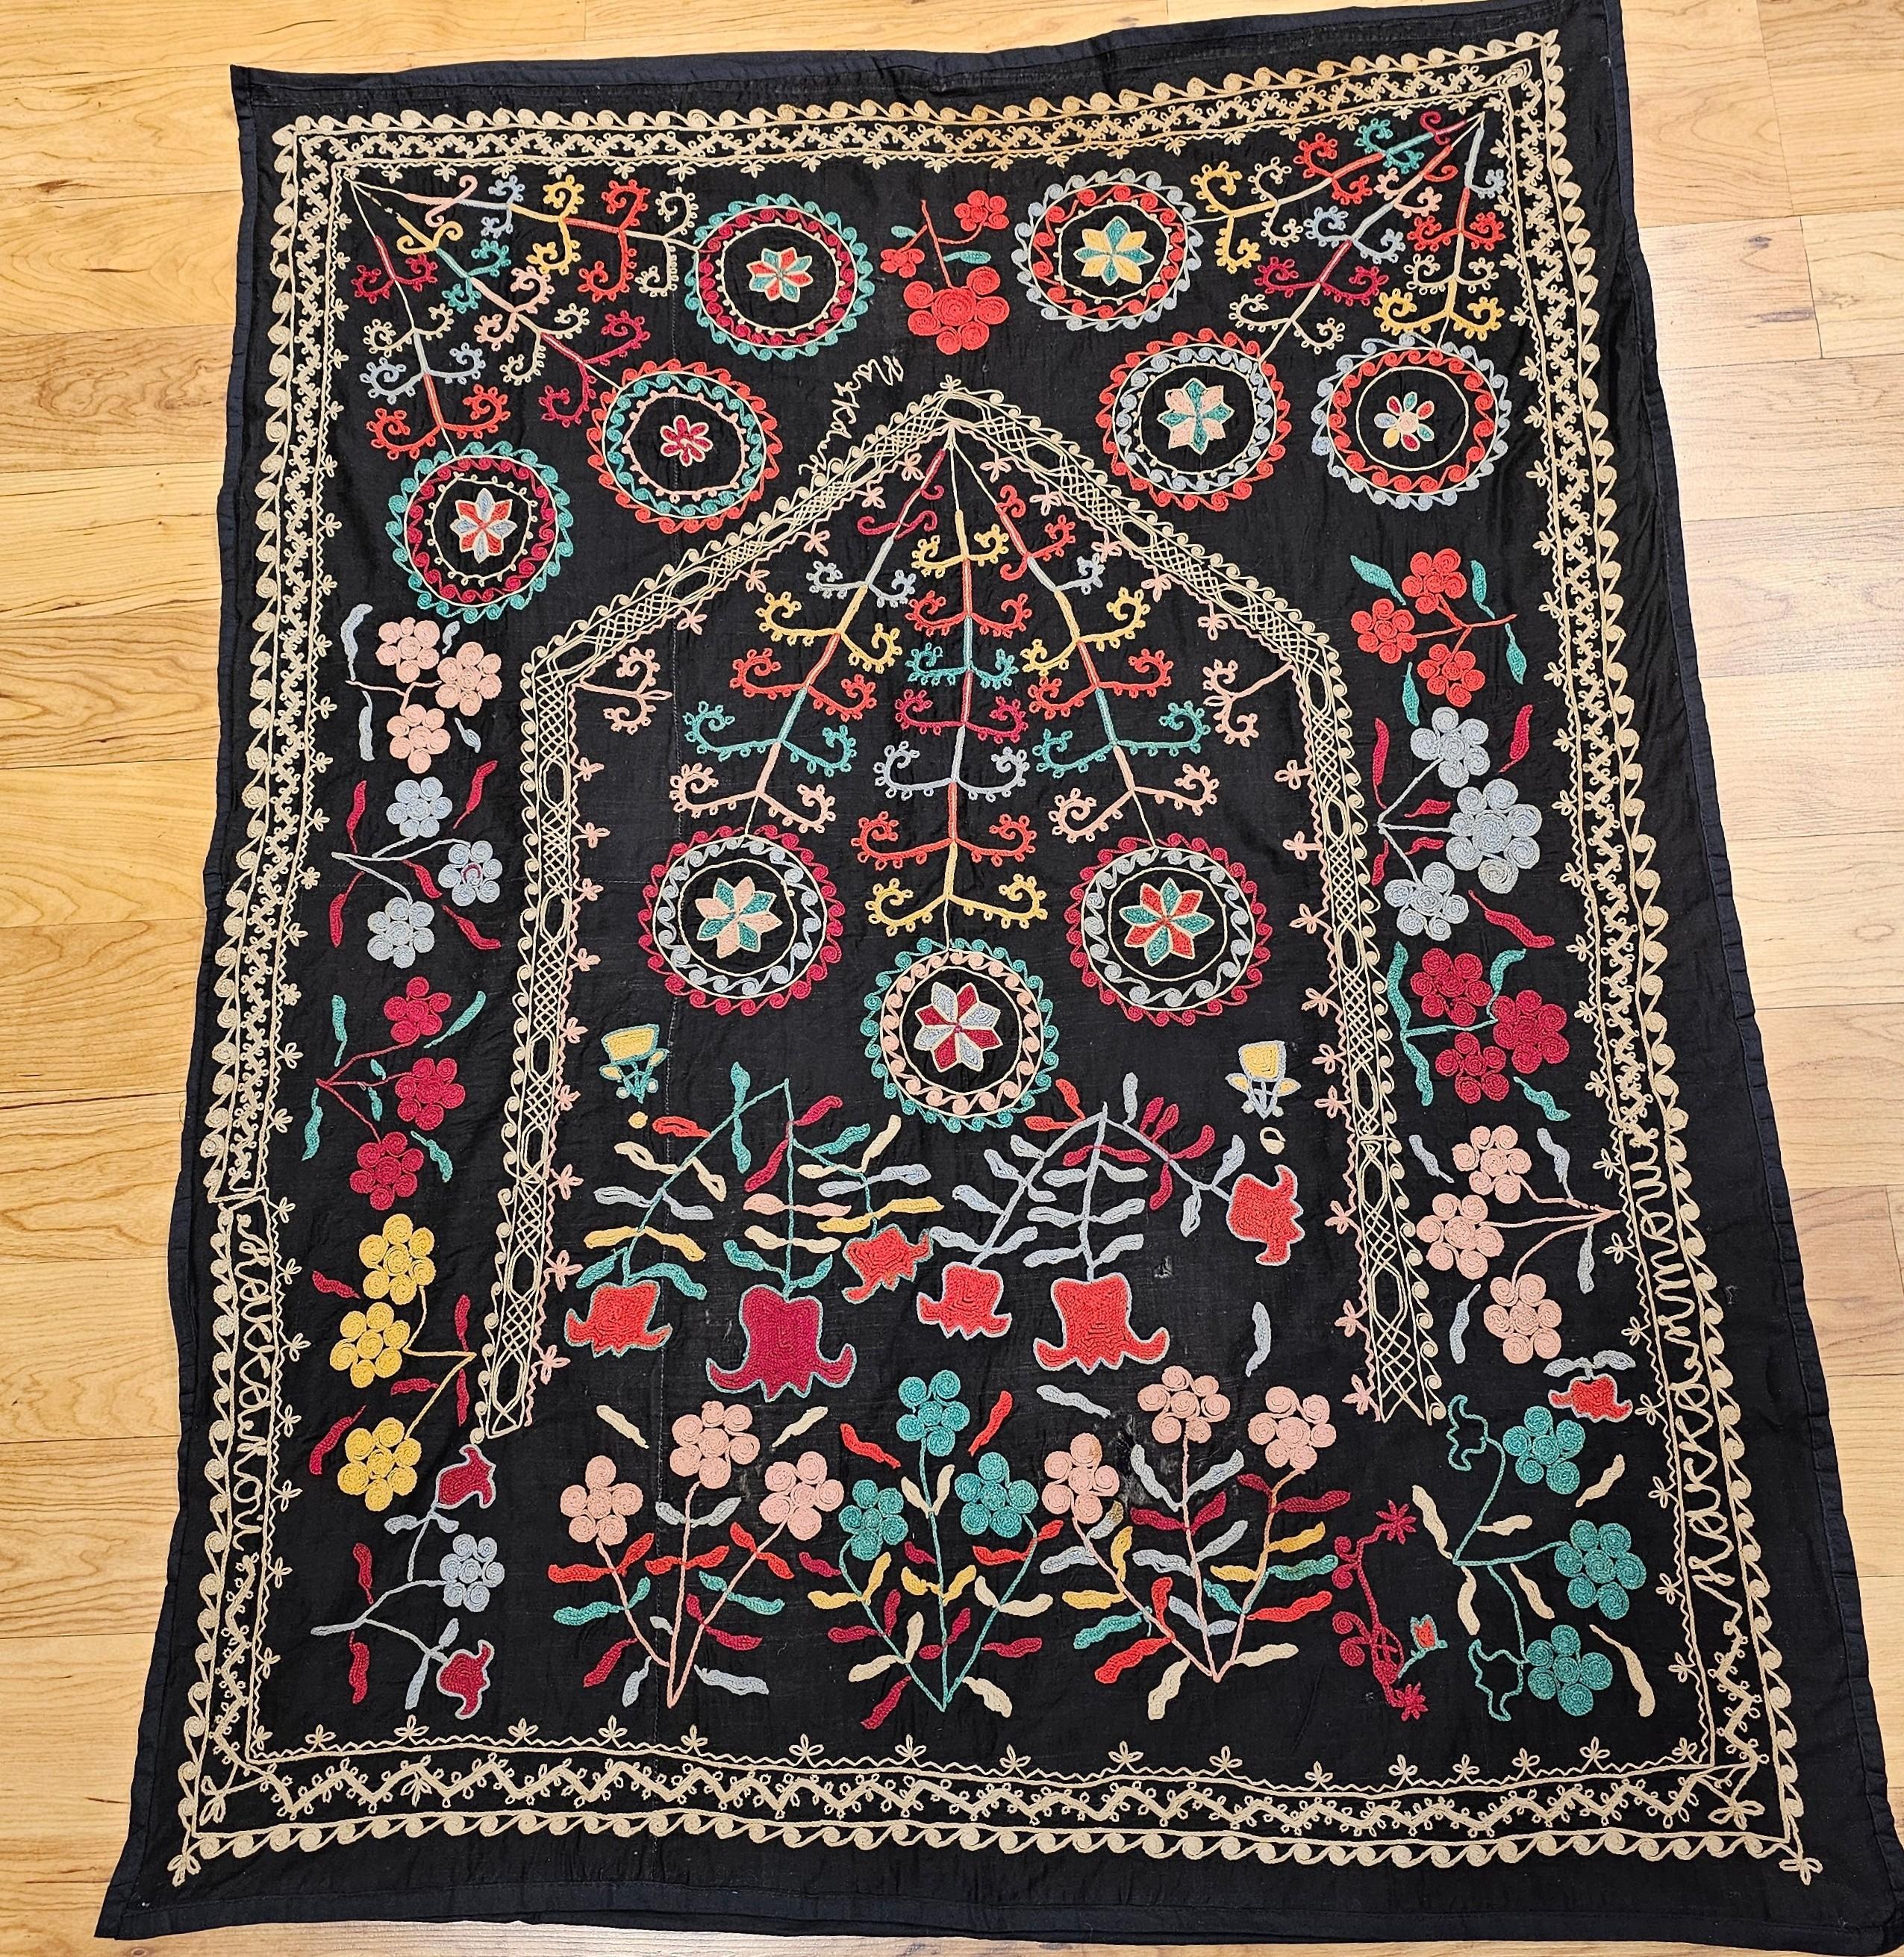 Vintage hand-stitched Suzani silk embroidery from Uzbekistan in Central Asia in a “Prayer Rug” pattern.  The vintage Uzbek Suzani is on a black cotton background with silk embroidery in red, blue, green, yellow.    The design of this Suzani